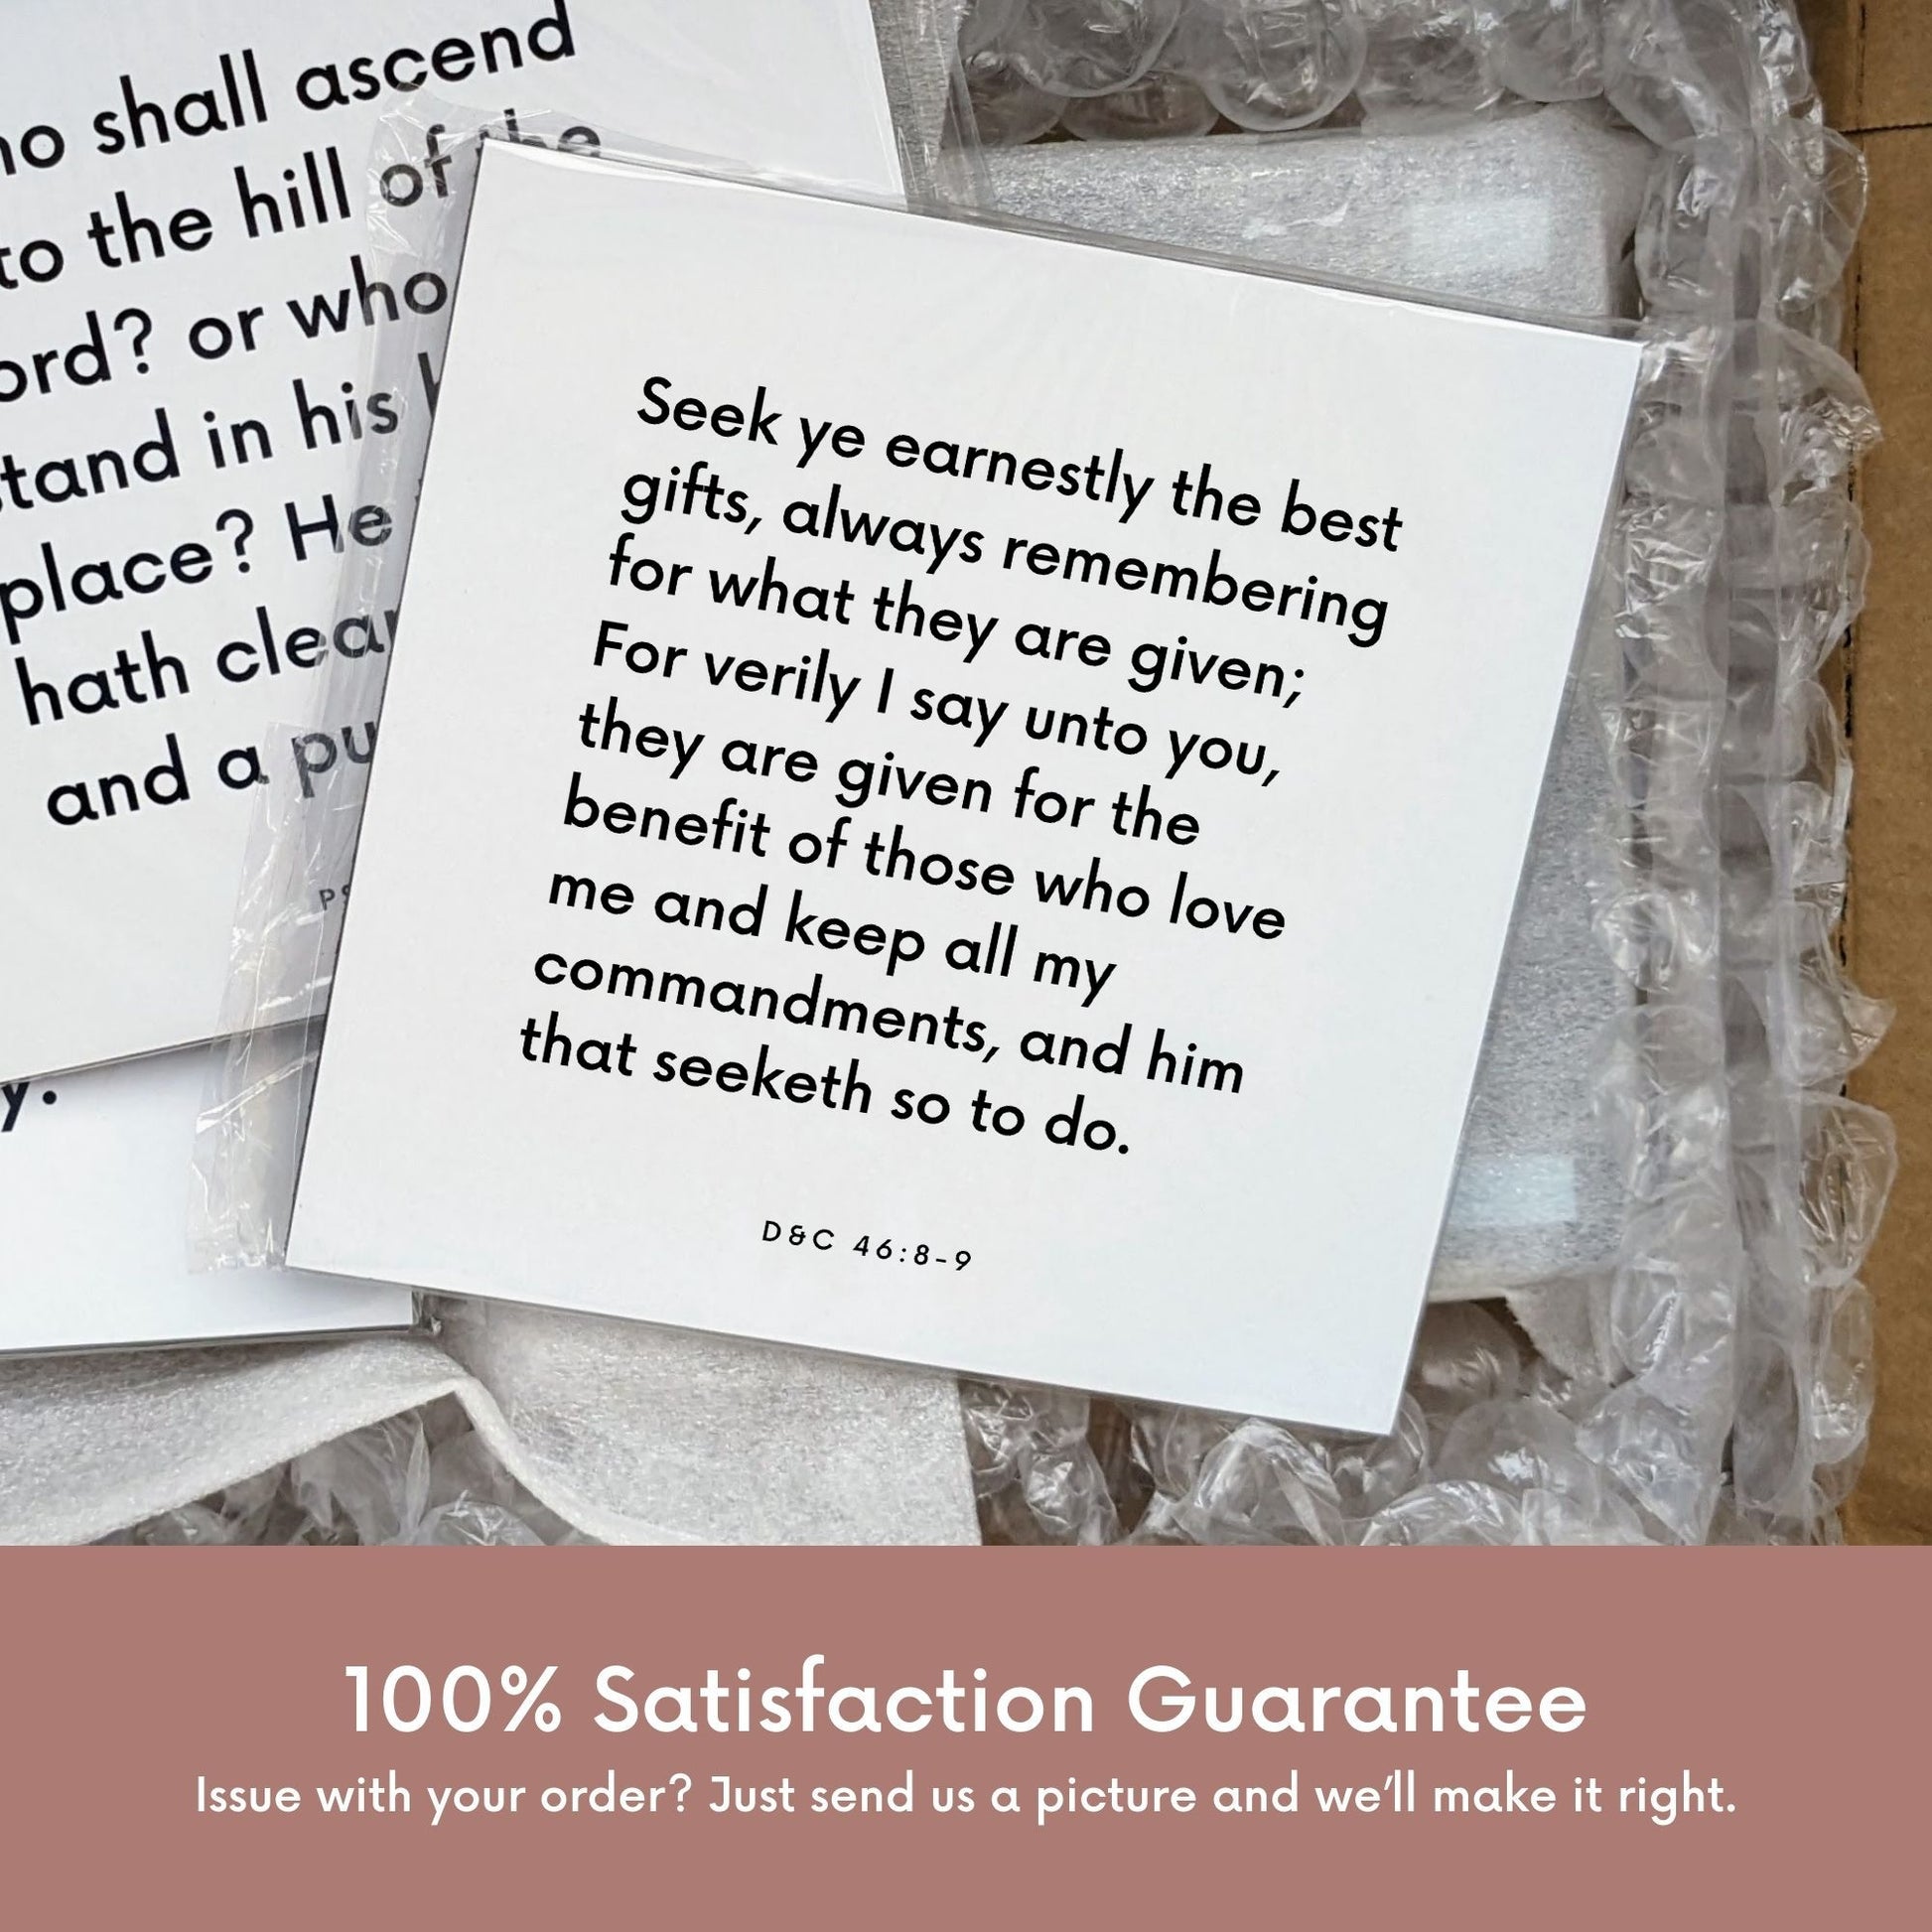 Shipping materials for scripture tile of D&C 46:8-9 - "Seek ye earnestly the best gifts"